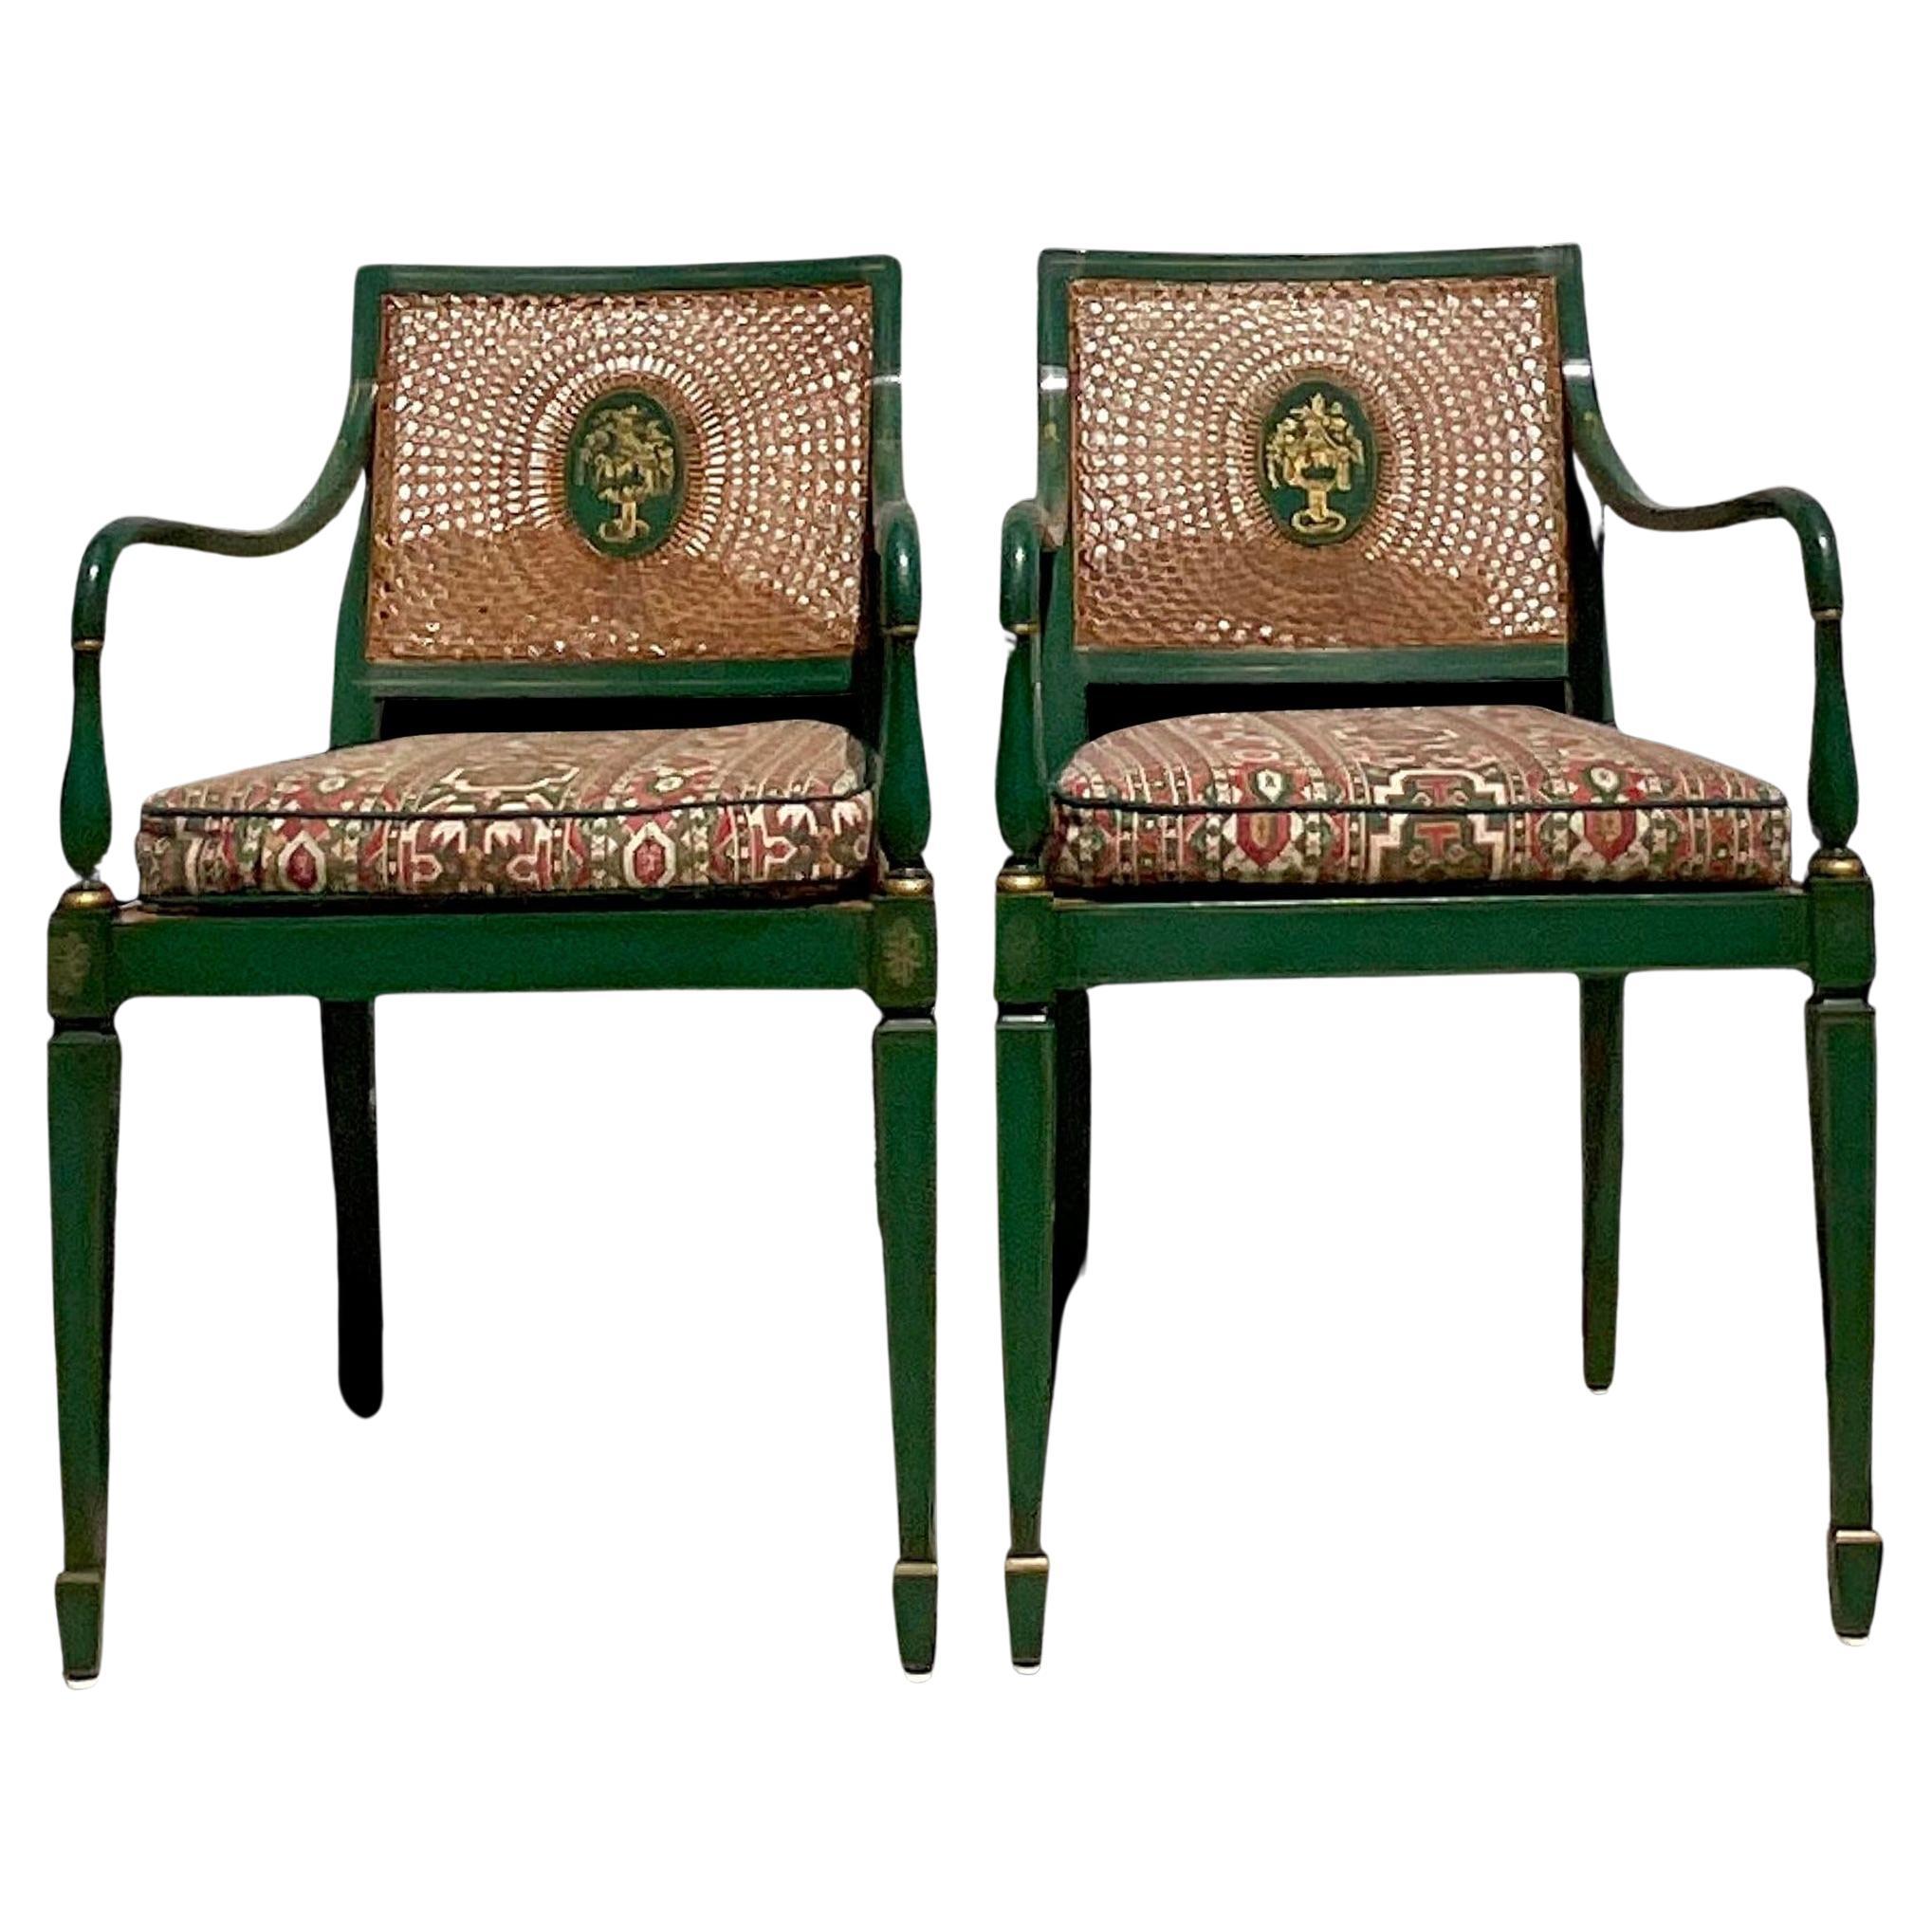 Vintage Regency Carver Cane Chairs - a Pair